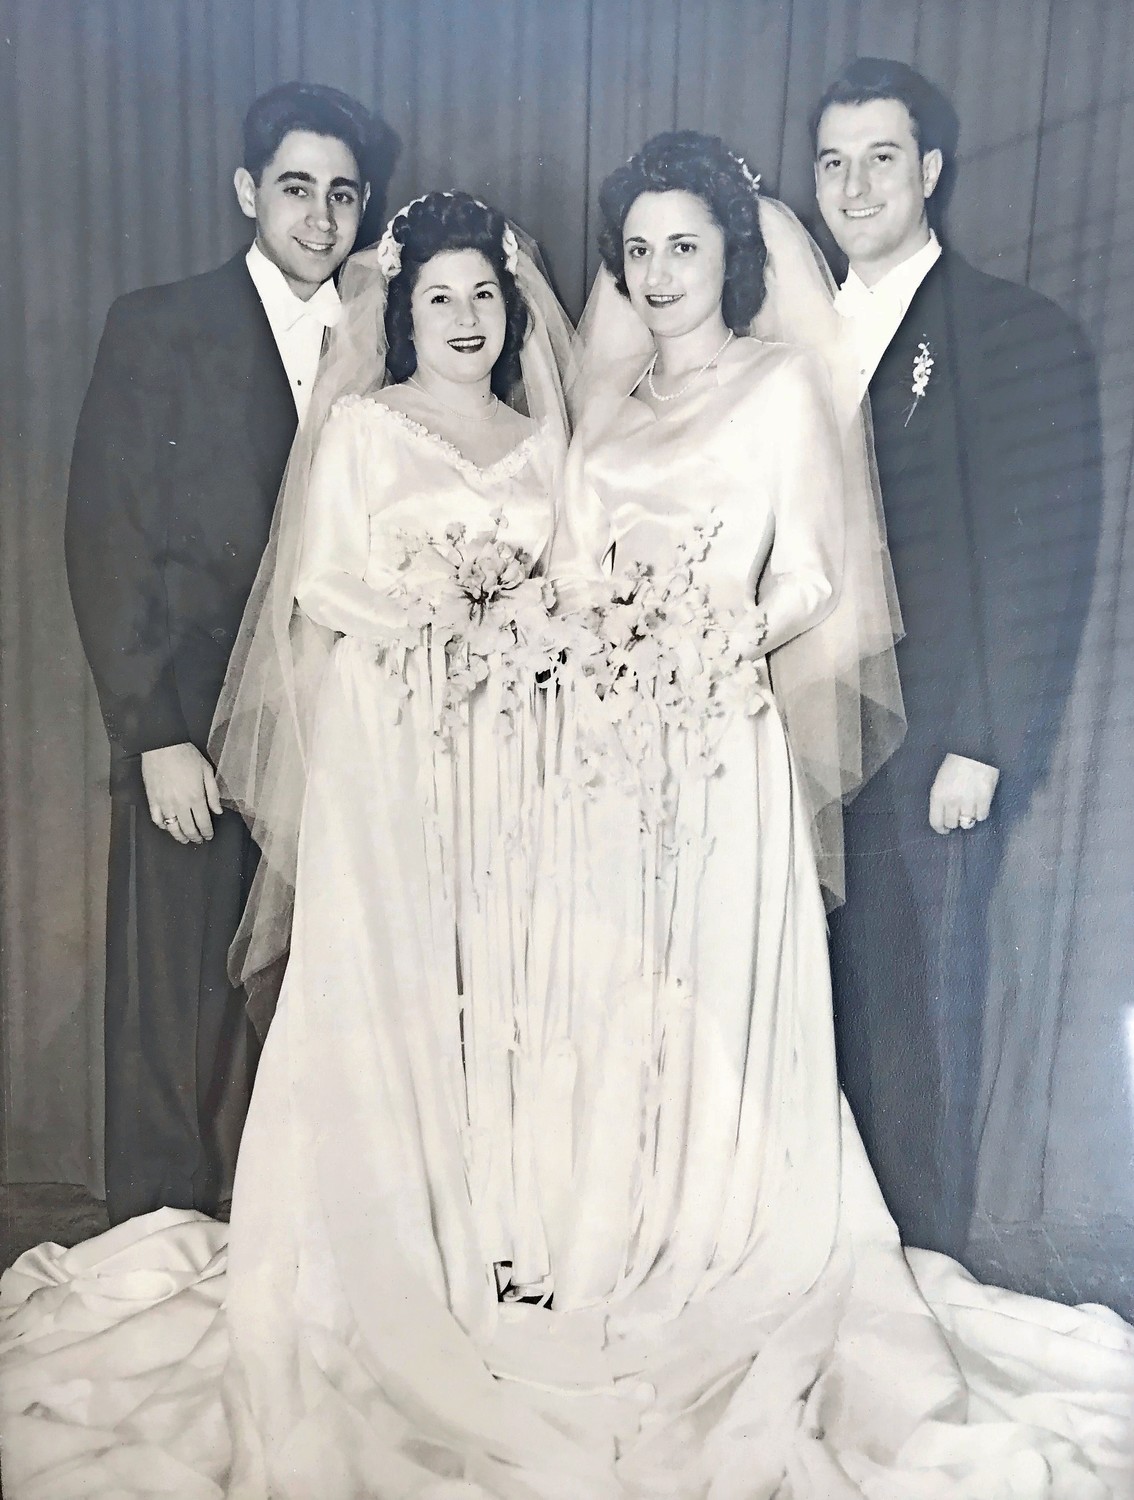 Johanna and Joseph Lucca, left, were married on Jan. 4, 1948, in a joint wedding with Joseph’s twin sister, Ann, and her husband, Joe LaGrotta.